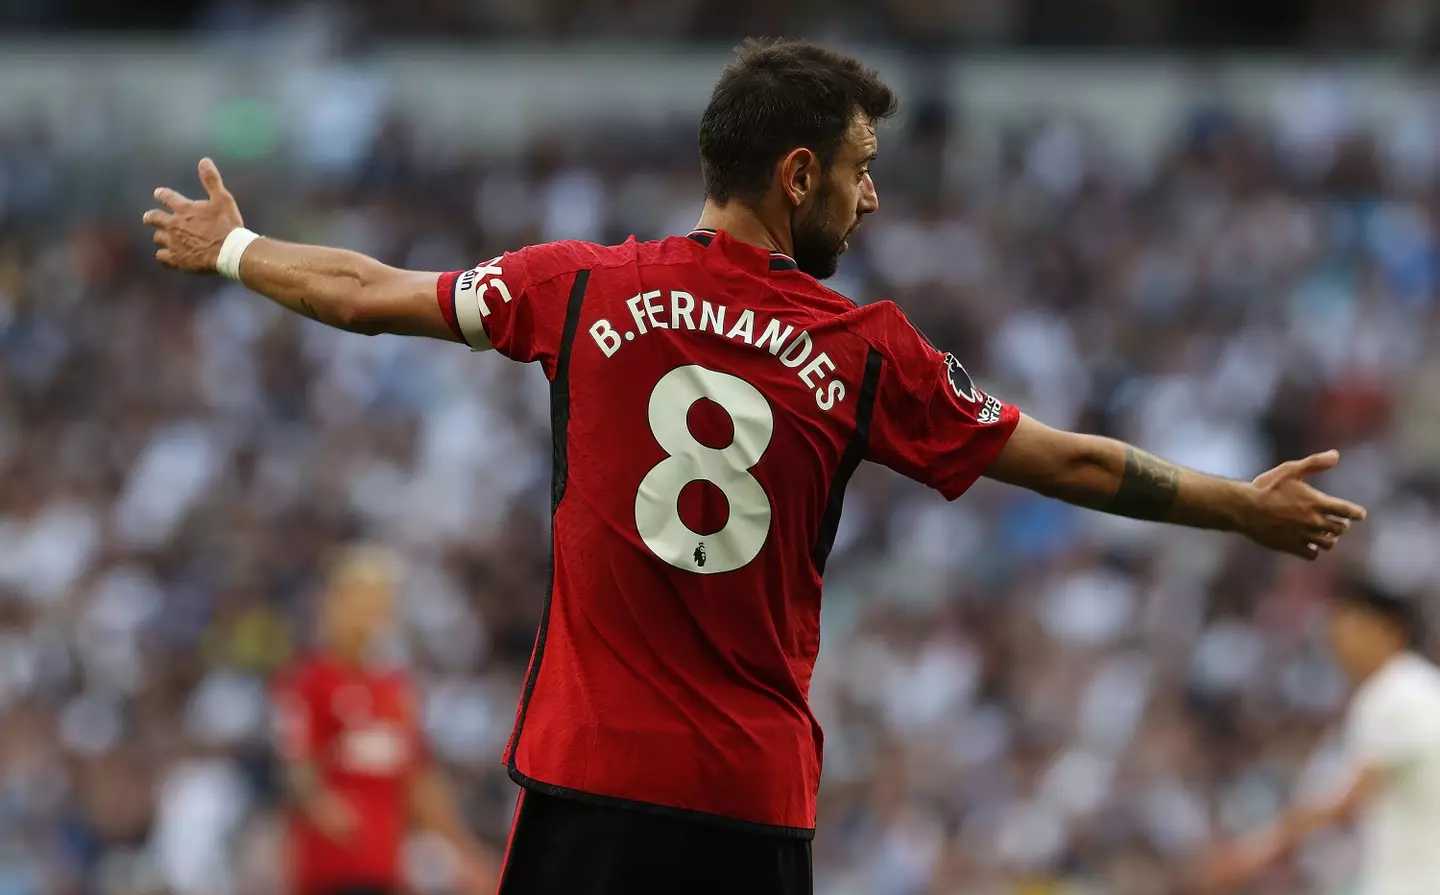 Bruno Fernandes in action for Manchester United. Image: Getty